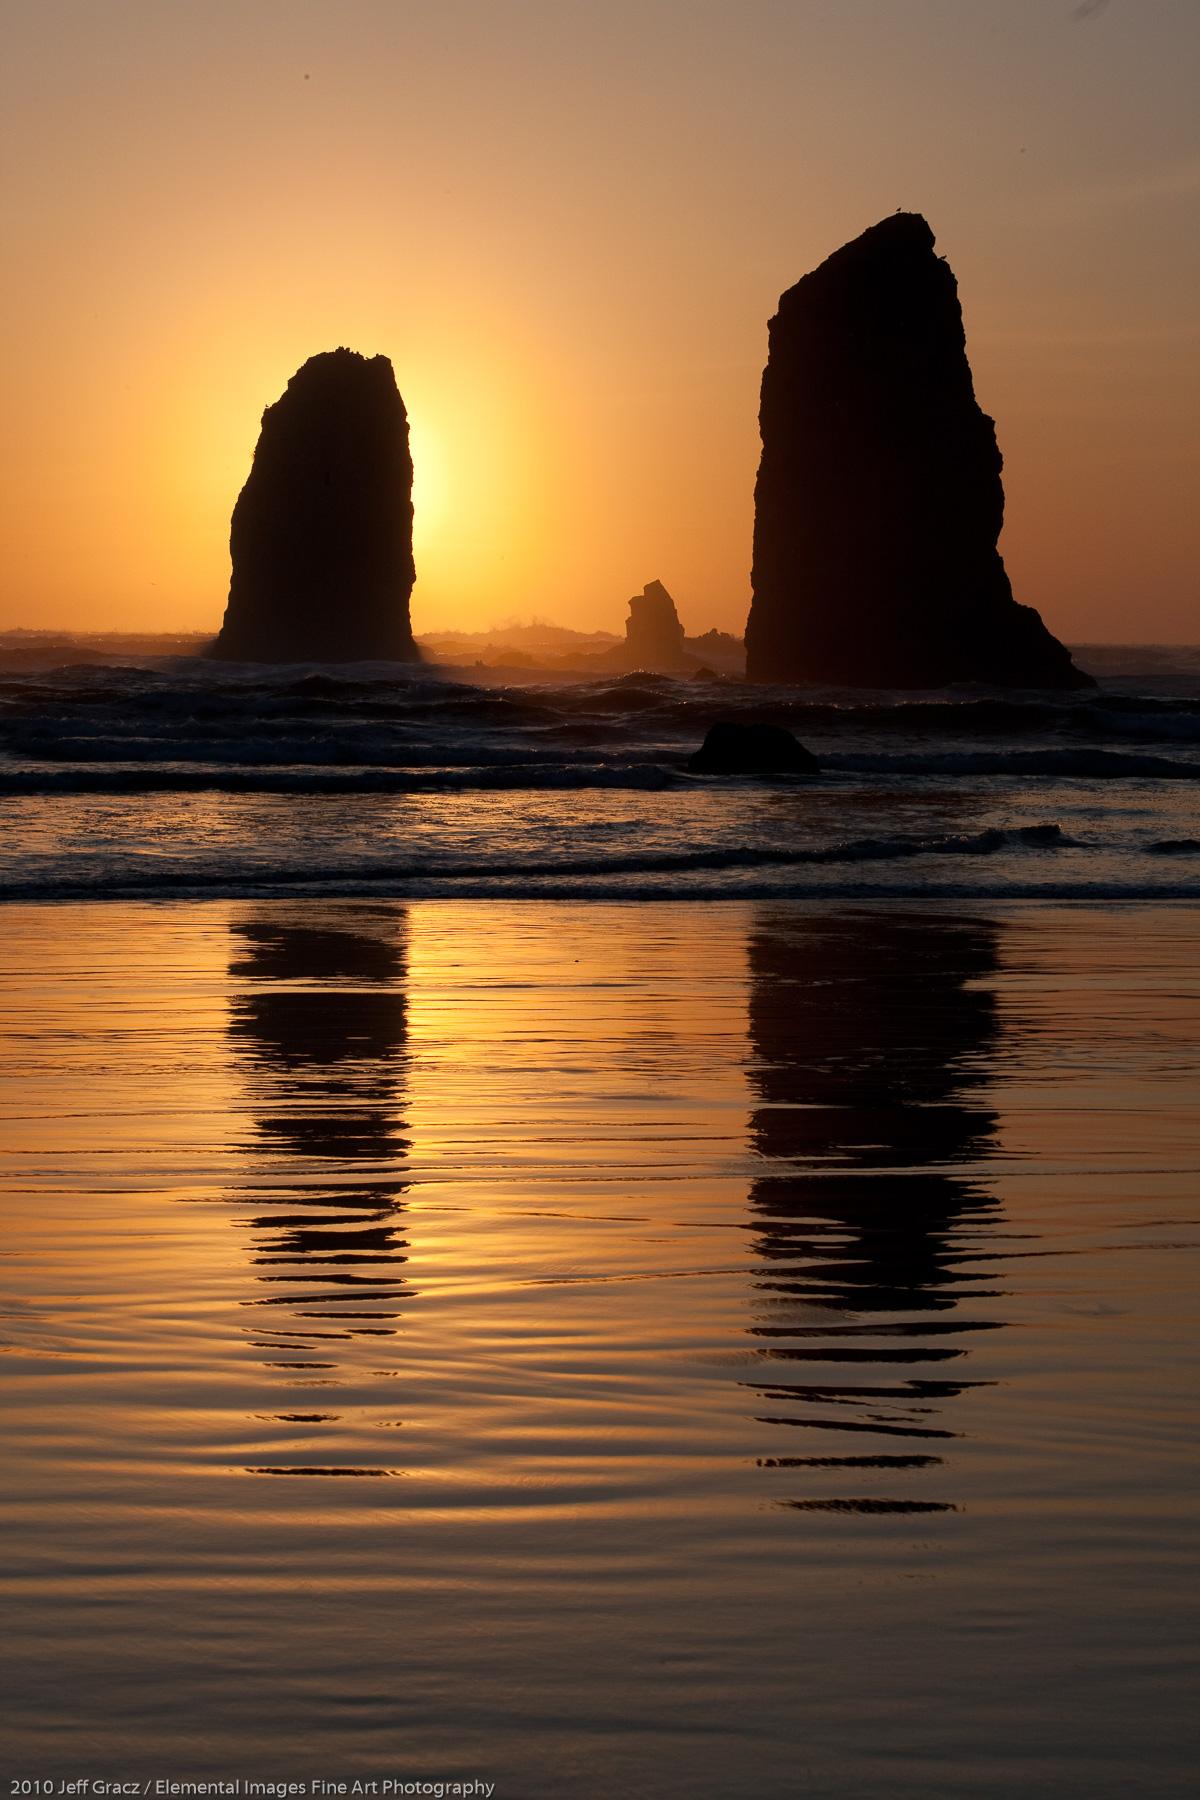 The Needles at sunset | Cannon Beach | OR |  - © 2010 Jeff Gracz / Elemental Images Fine Art Photography - All Rights Reserved Worldwide